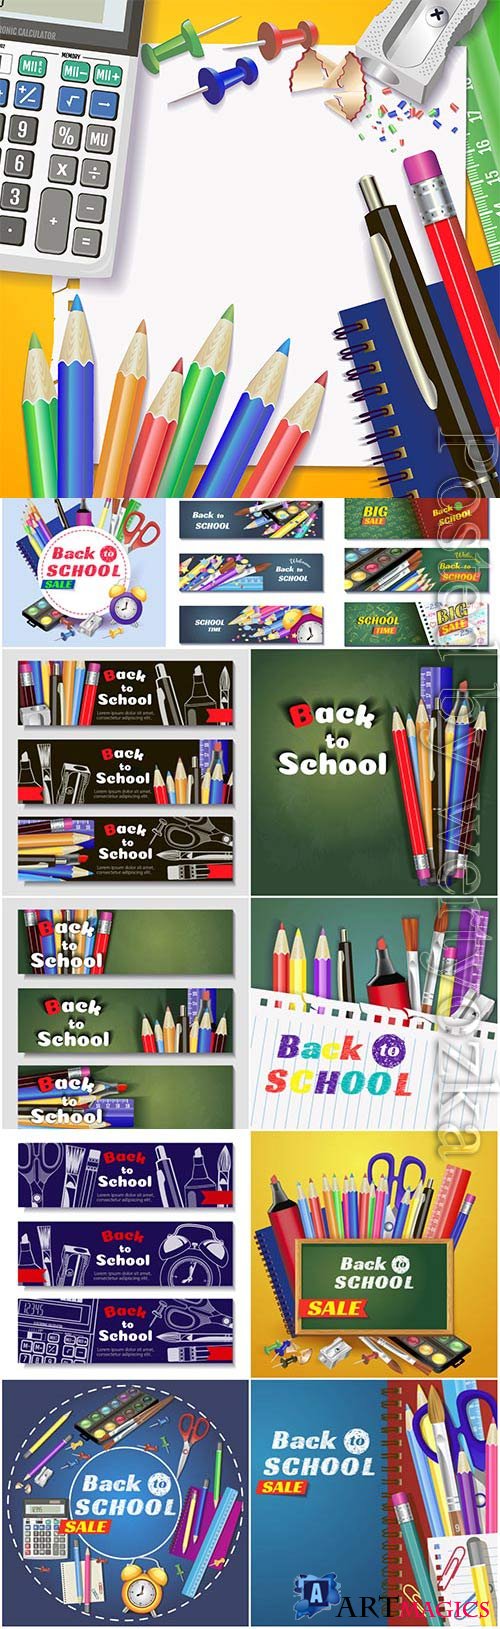 School banners and backgrounds in vector